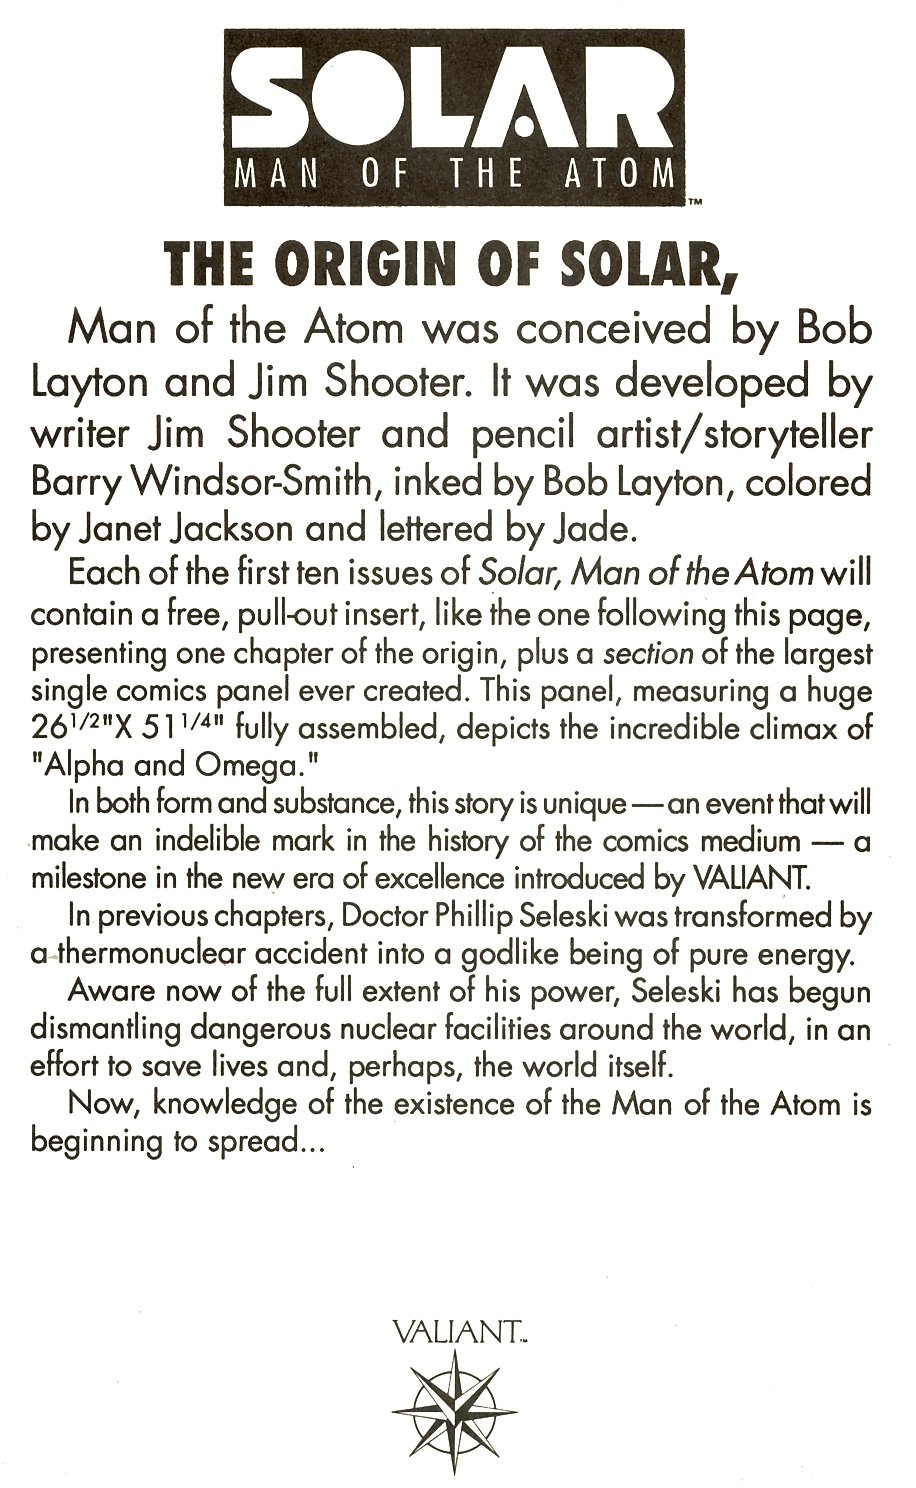 Read online Solar, Man of the Atom comic -  Issue #8 - 18